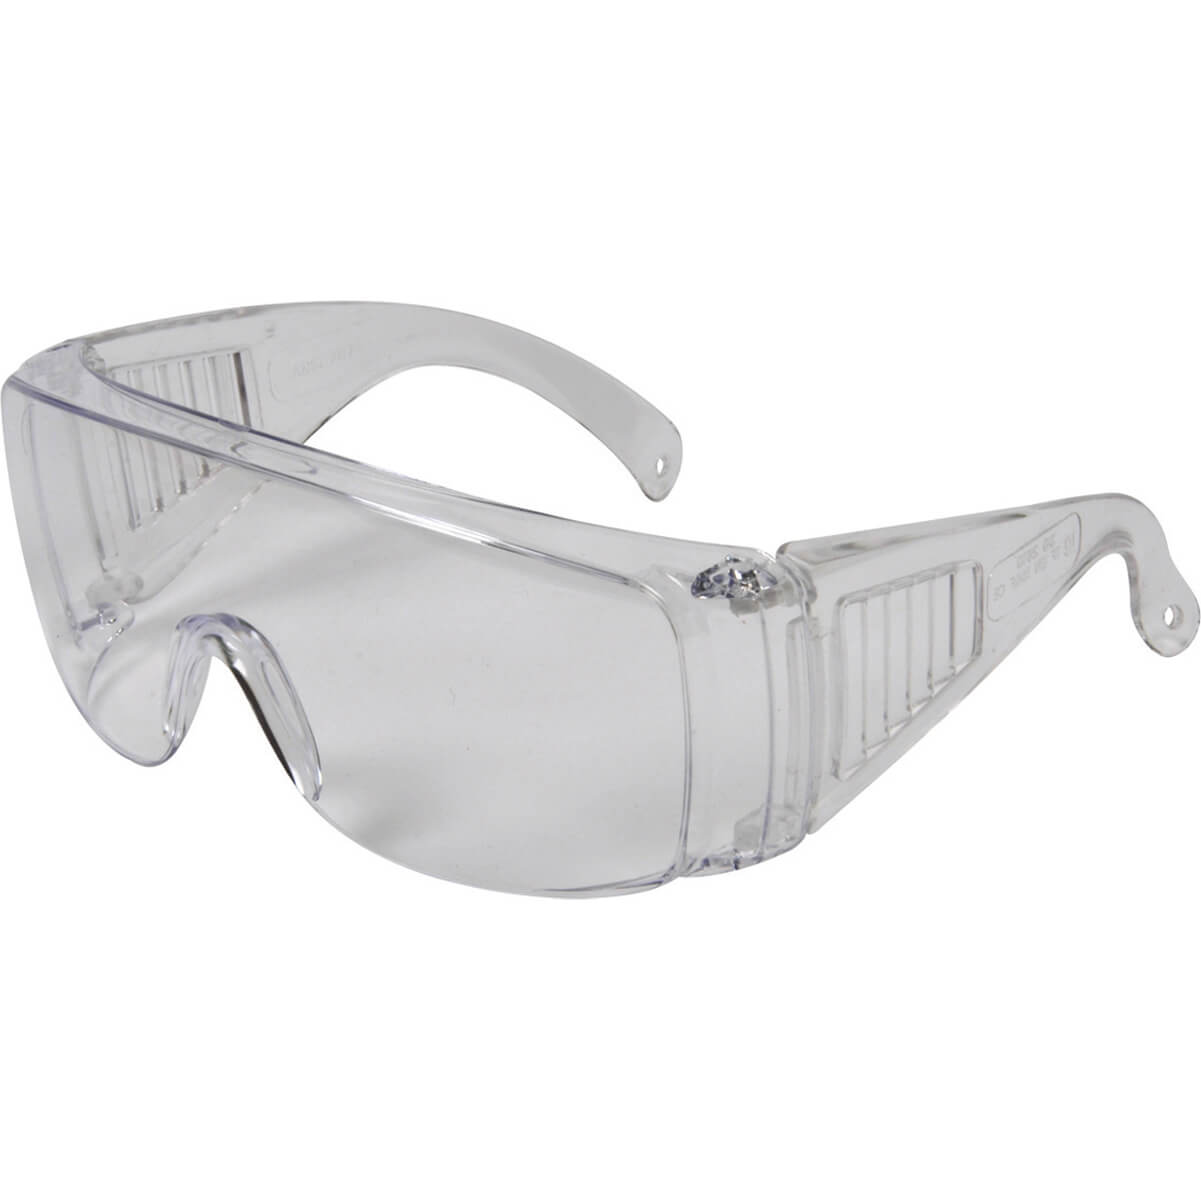 Image of Avit Cover Safety Glasses Clear Clear